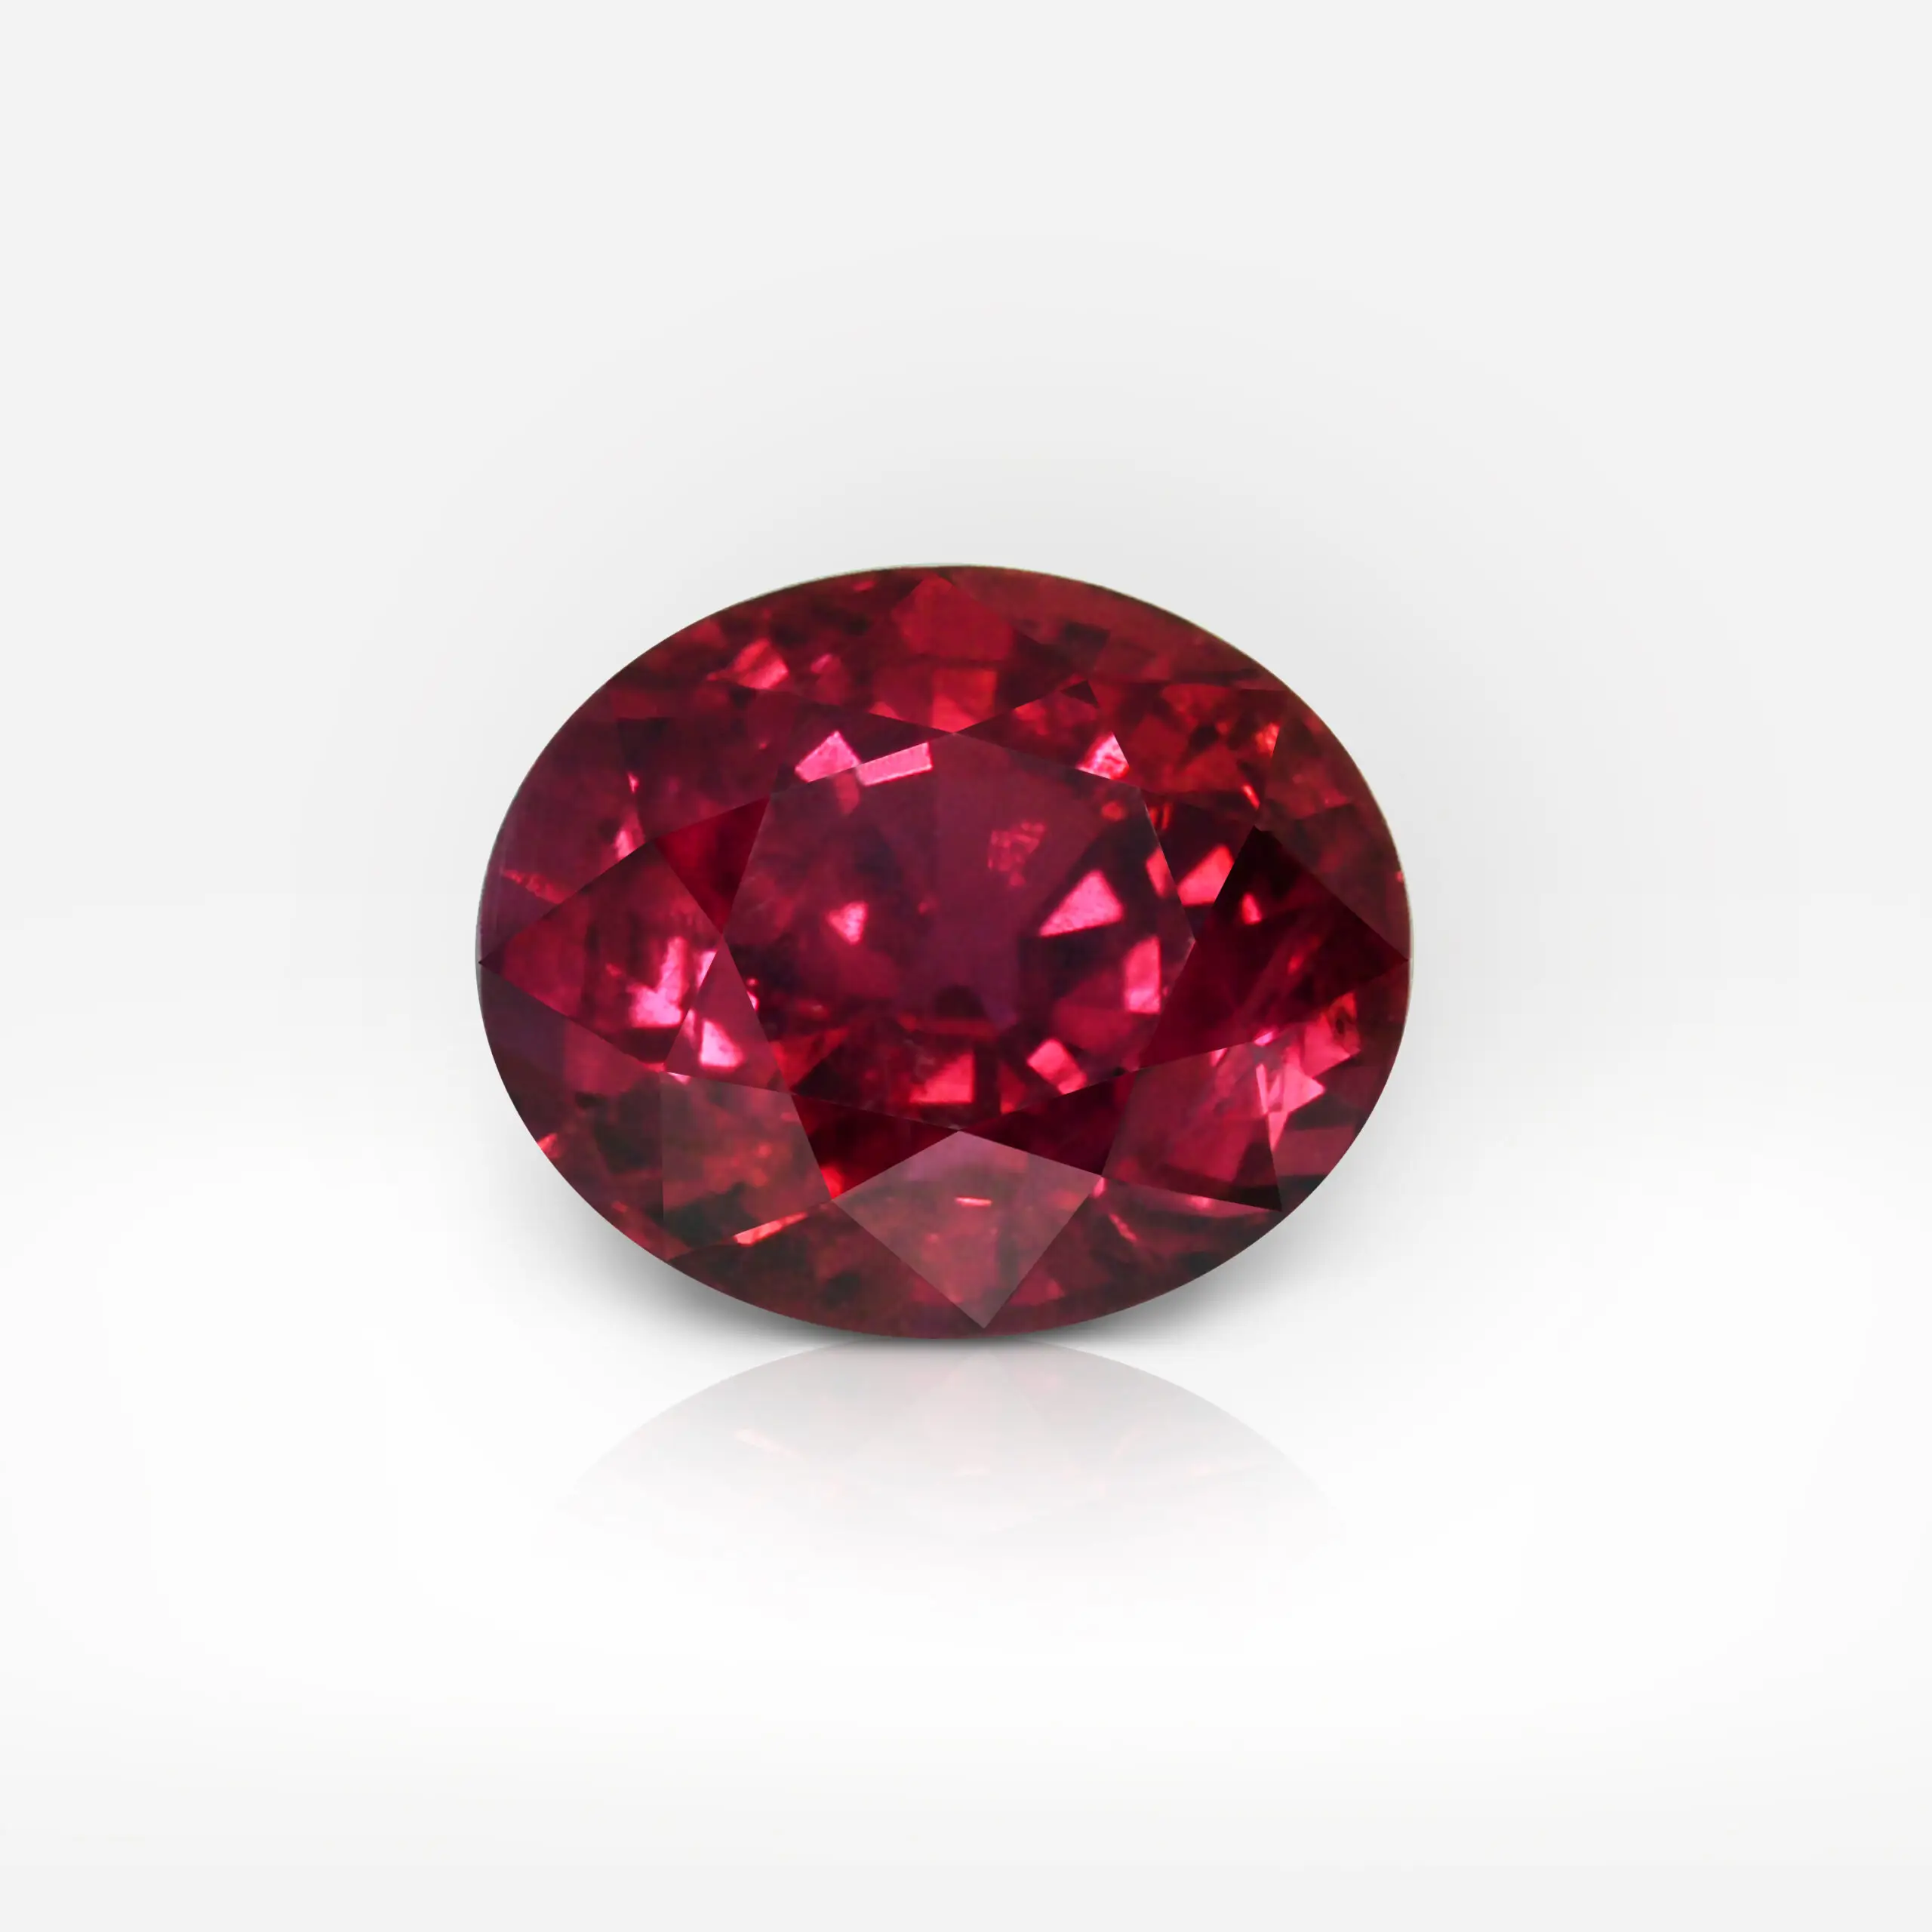 1.82 carat Oval Shape Vivid Deep Red Ruby ALGT - picture 1